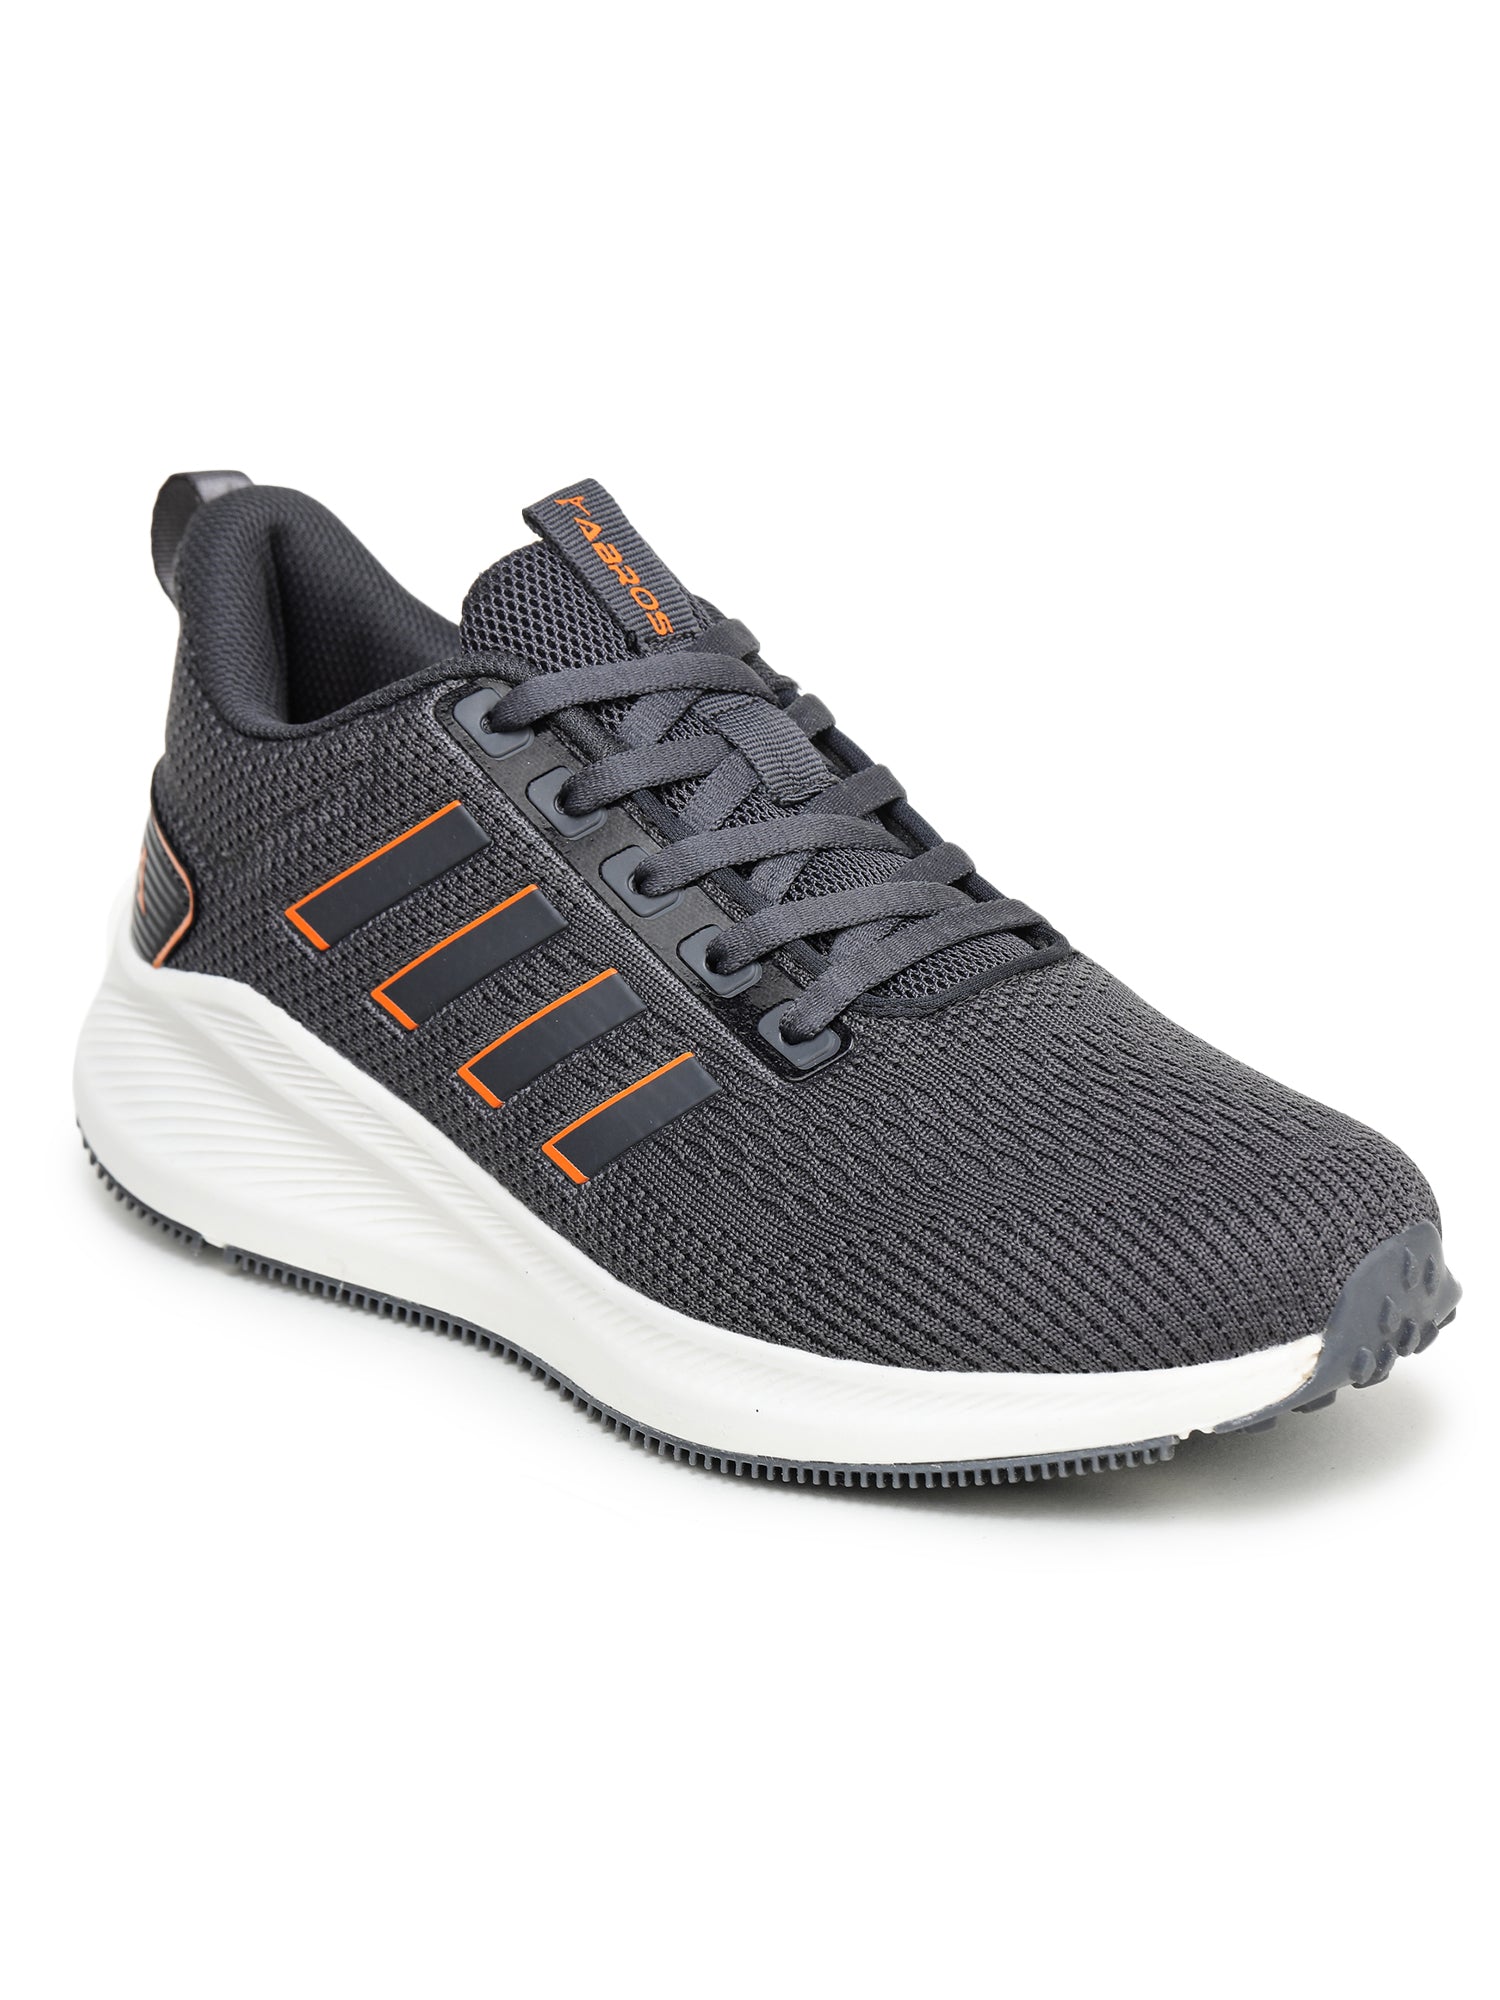 ABROS RACER SPORTS SHOES FOR MEN